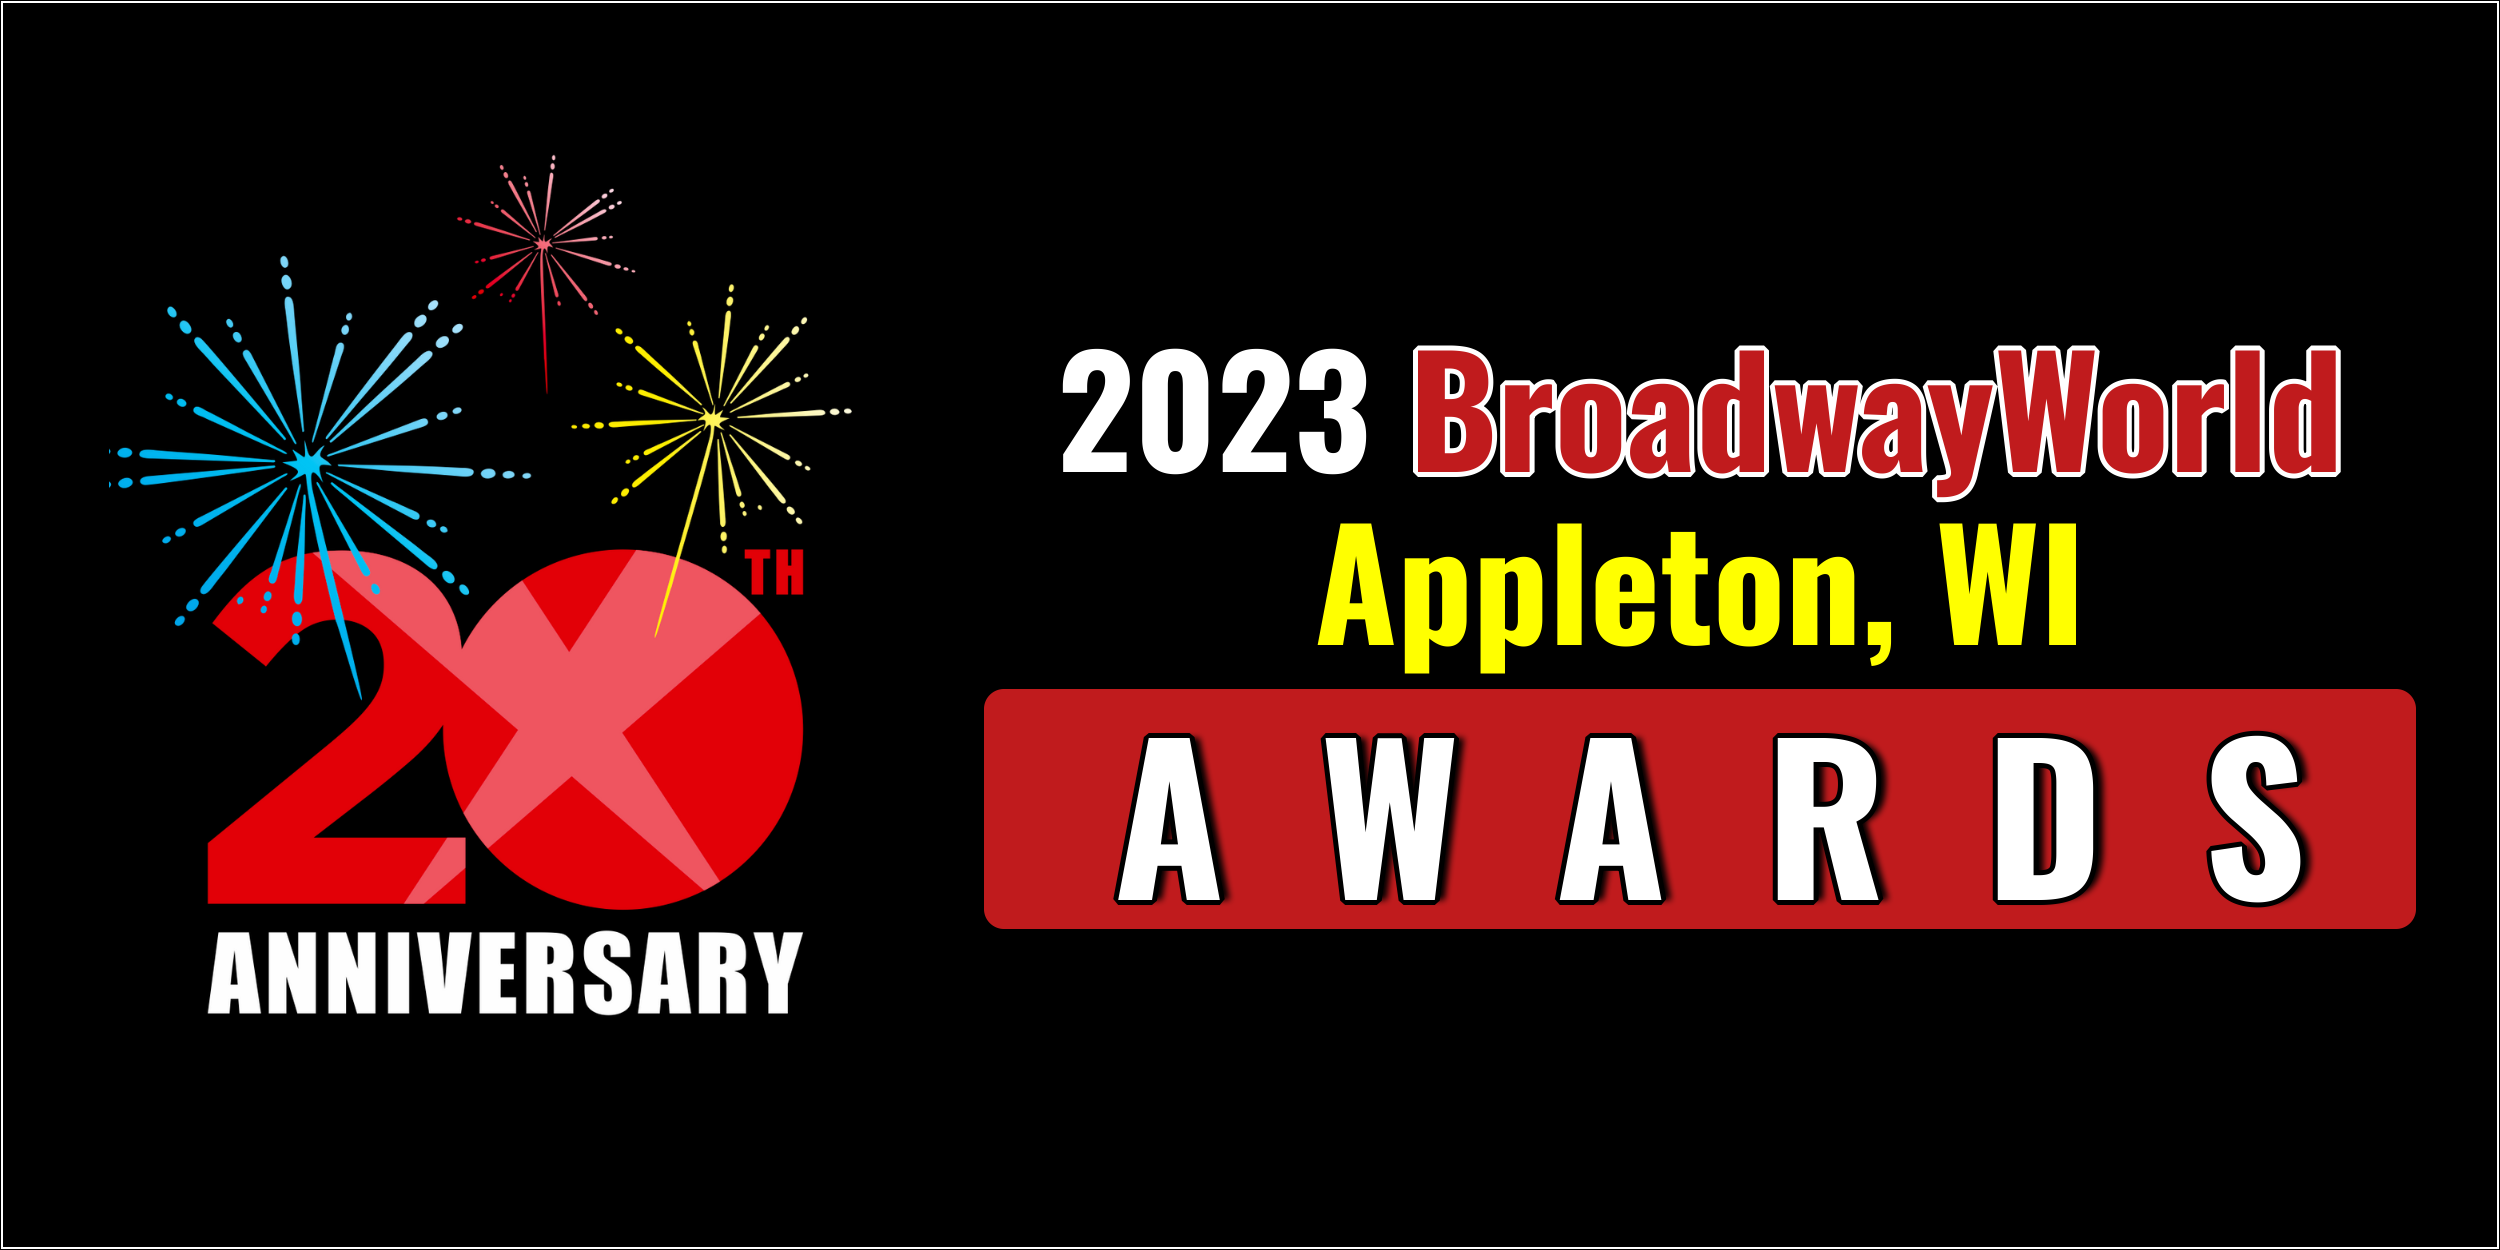 Latest Standings Announced For The 2023 BroadwayWorld Appleton, WI Awards; MACBETH Leads Best Play! 